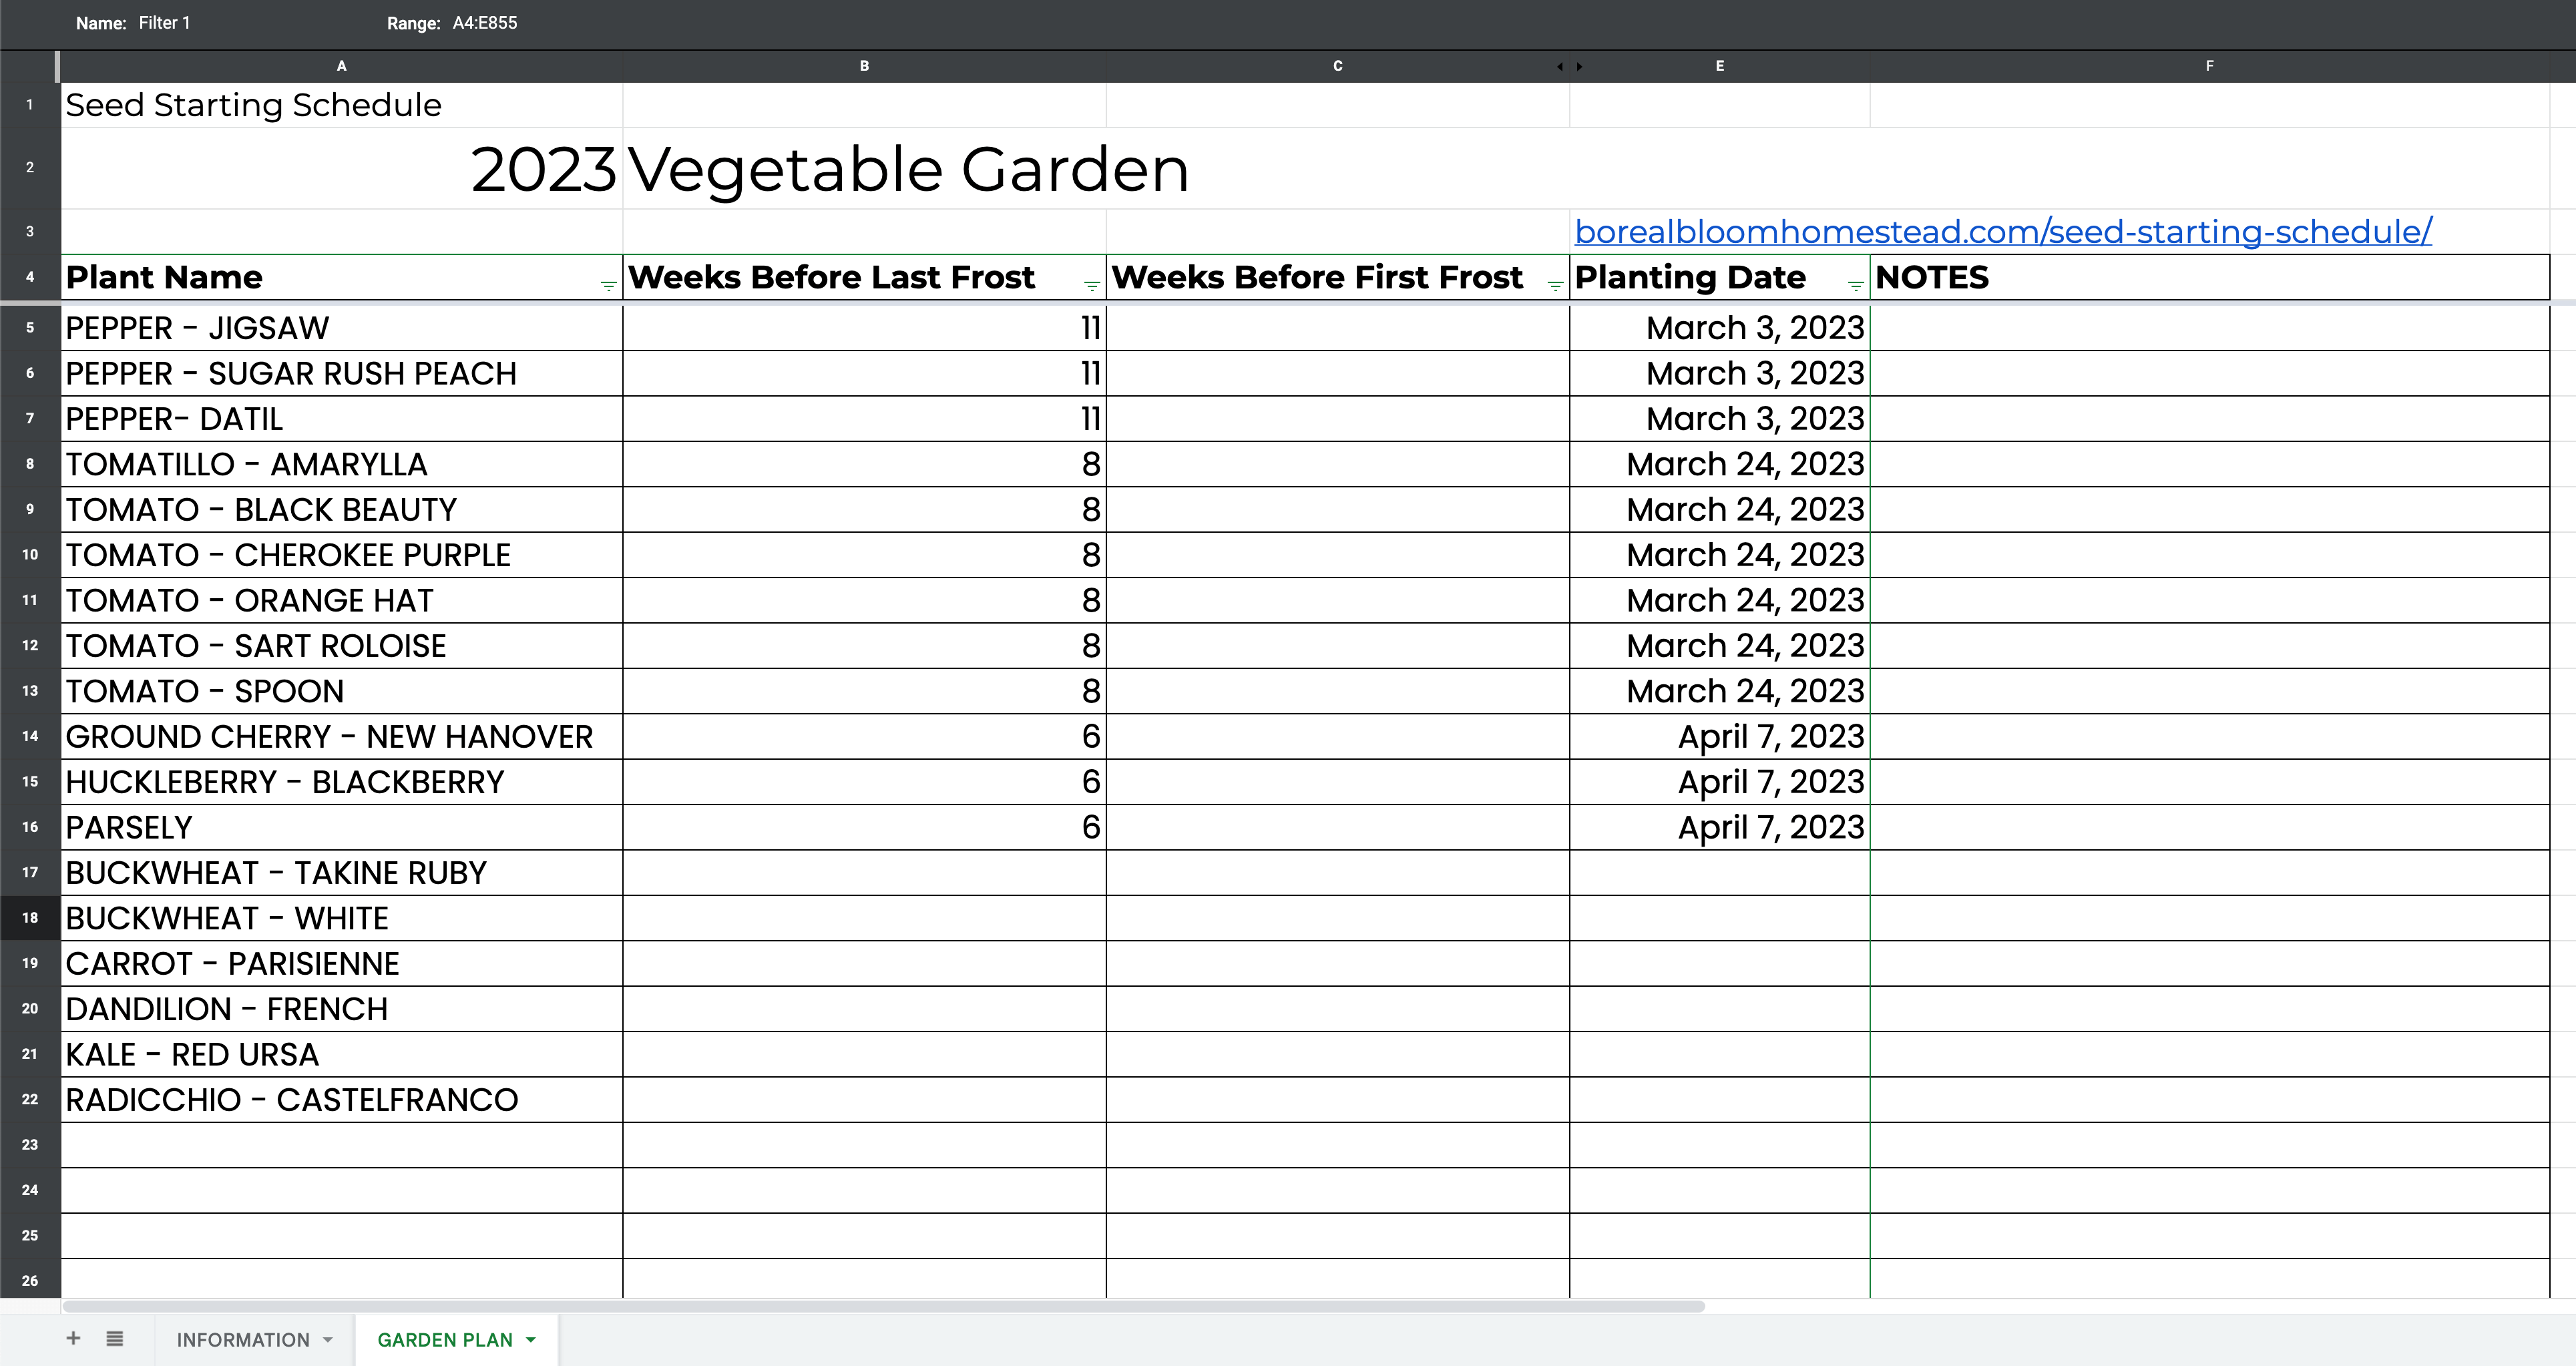 Spreadsheet filled with seed starting information including seed name, weeks before frost, etc. 